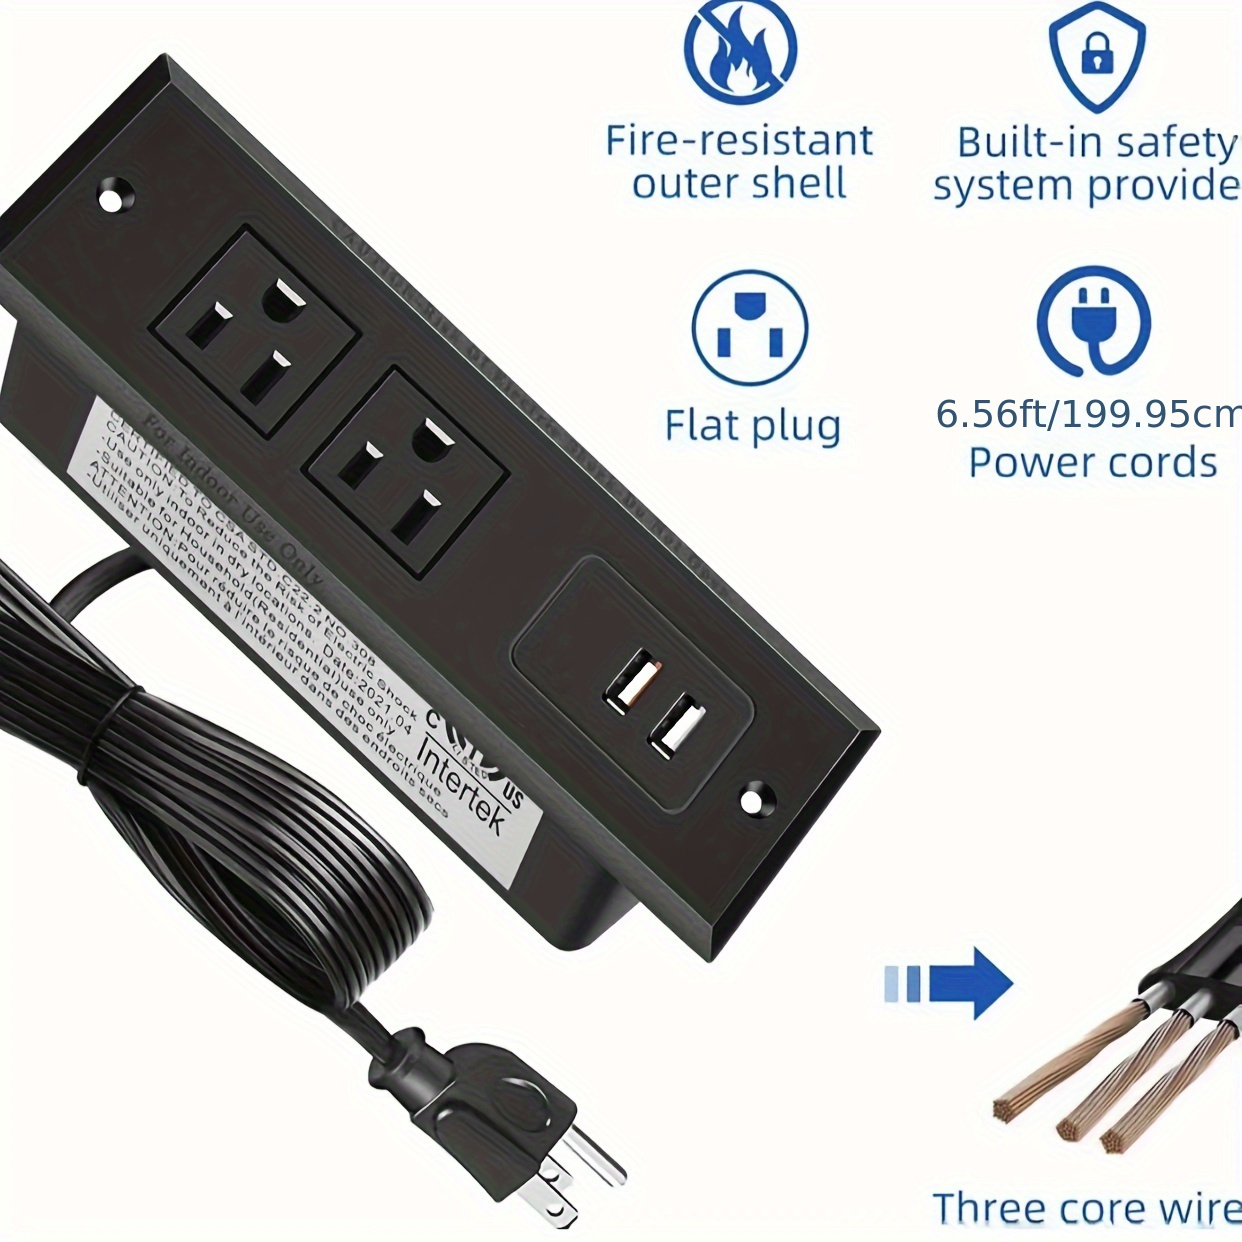 Desk Outlet With Usb Etl Listed Conference Outlet Socket With 2 Ac Plugs 2  Usb Ports Connect With 5ft Power Cord For Furniture Home Office Black, Check Out Today's Deals Now